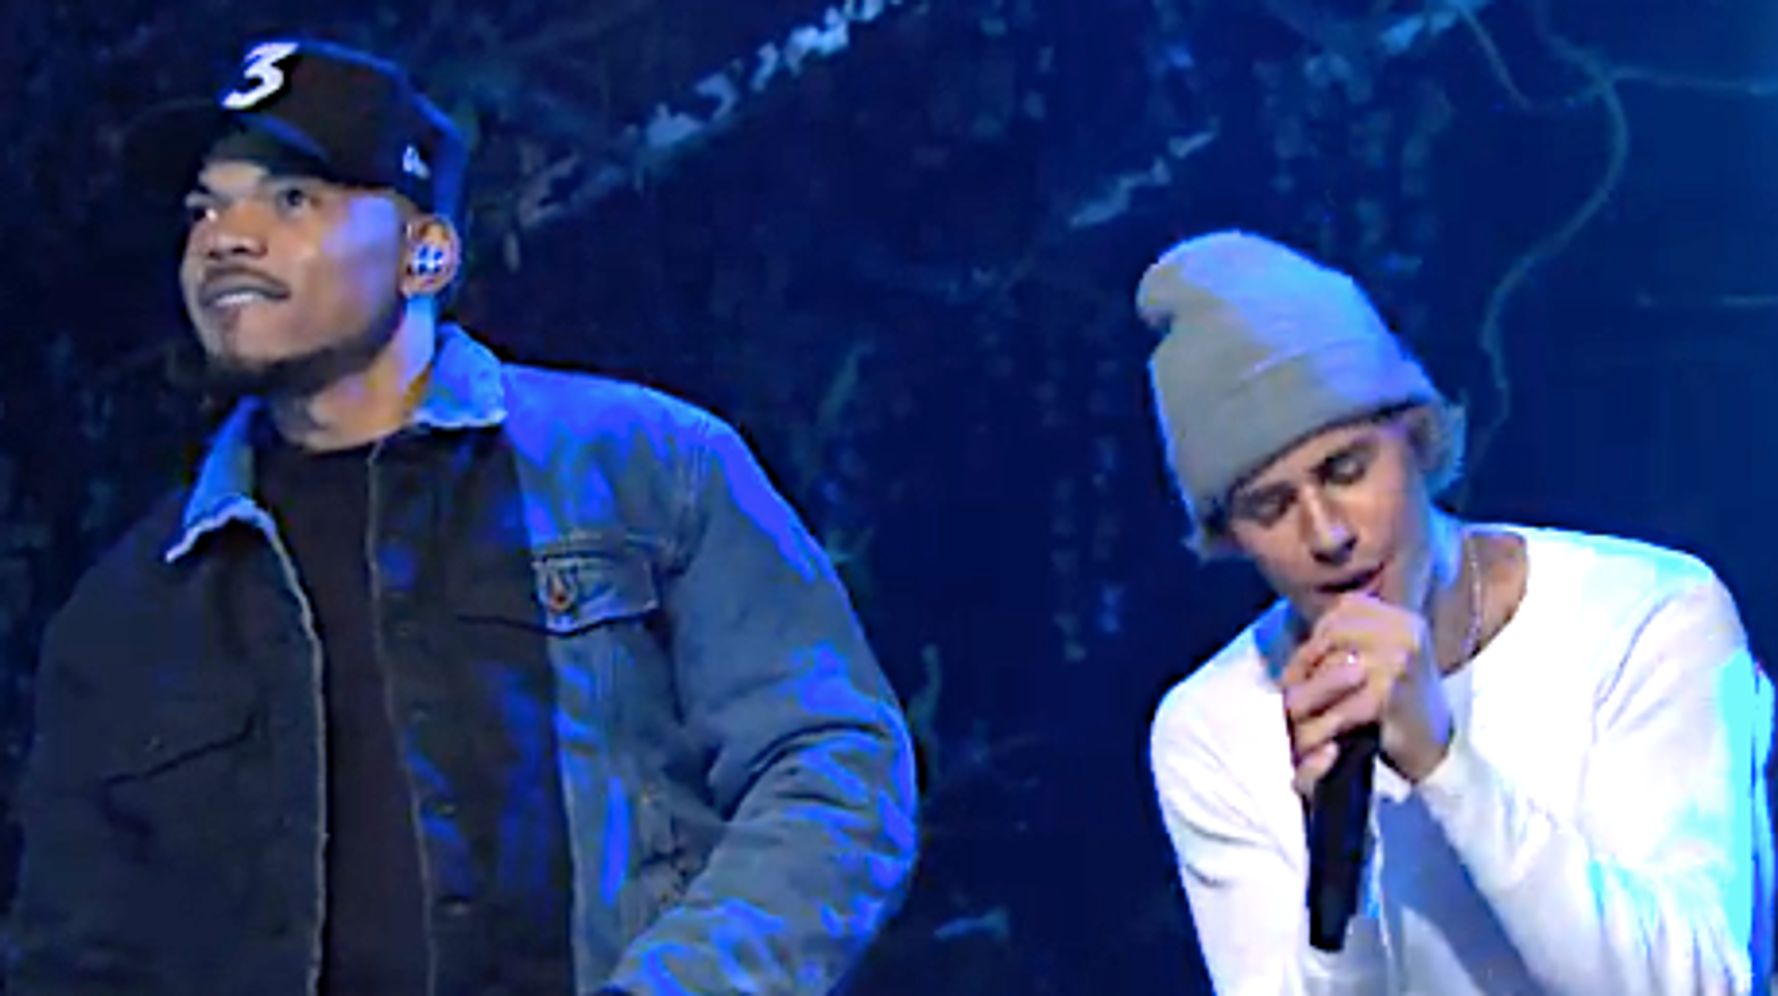 Justin Bieber Bares Pain Of Young Fame In Powerful New Song ‘Lonely’ On ‘SNL’